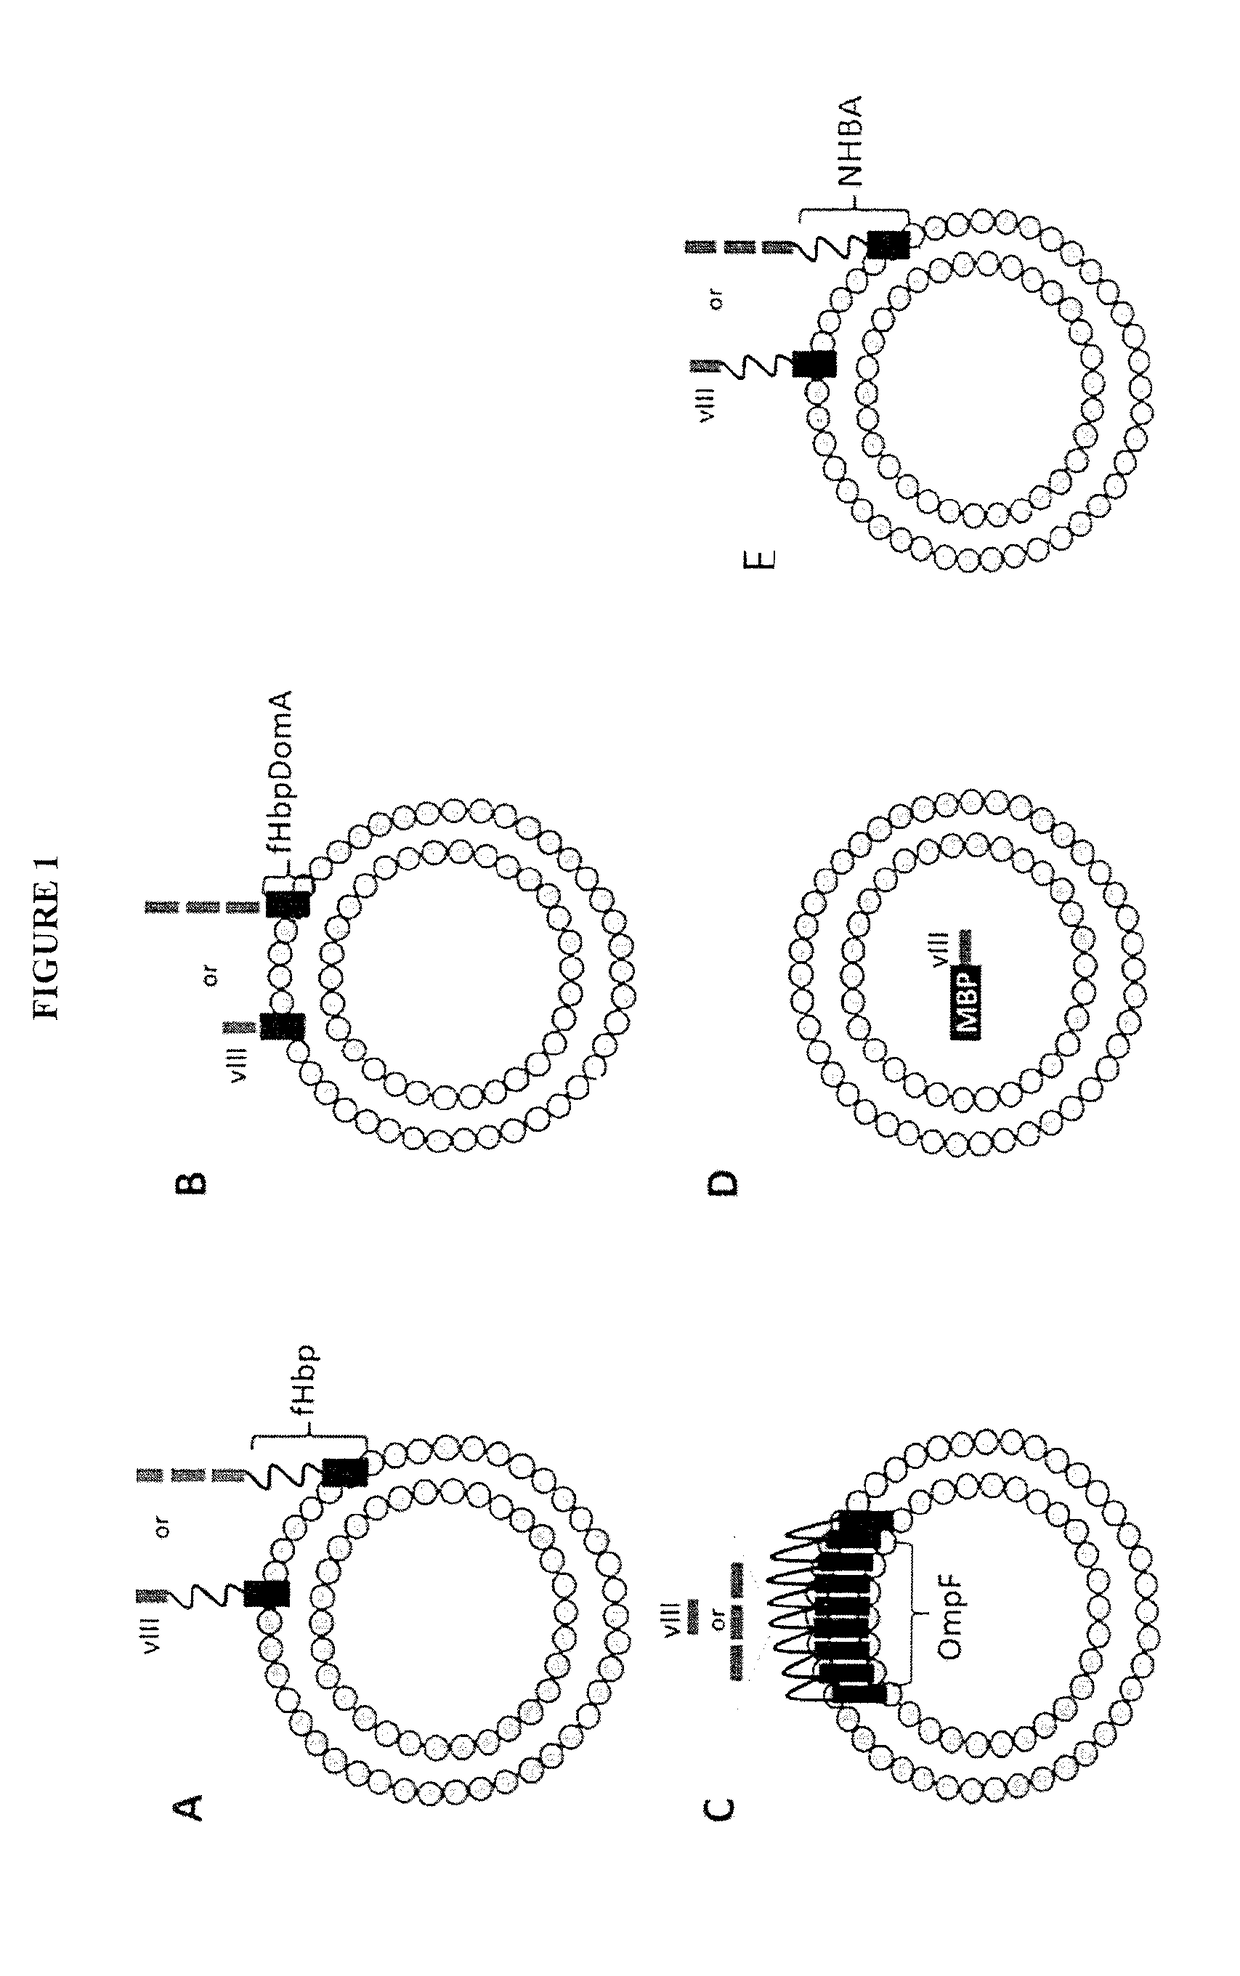 Immunogenic compositions containing bacterial outer membrane vesicles and therapeutic uses thereof